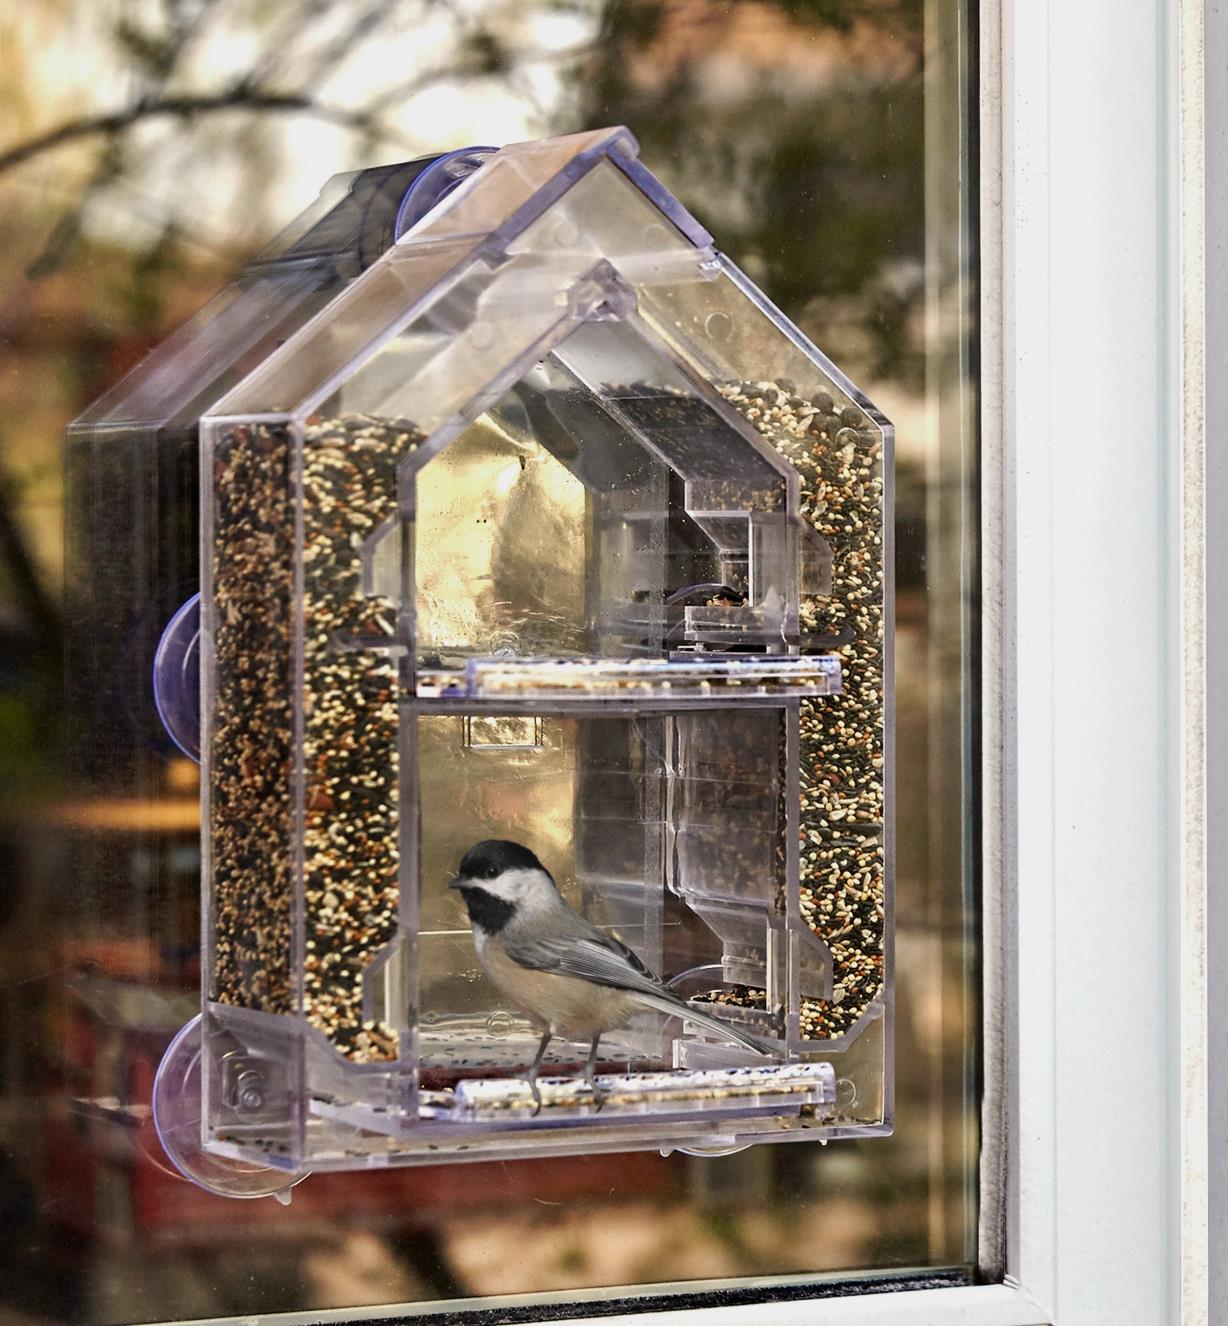 A chickadee feeding from a window bird feeder mounted on a window pane, seen from the outside